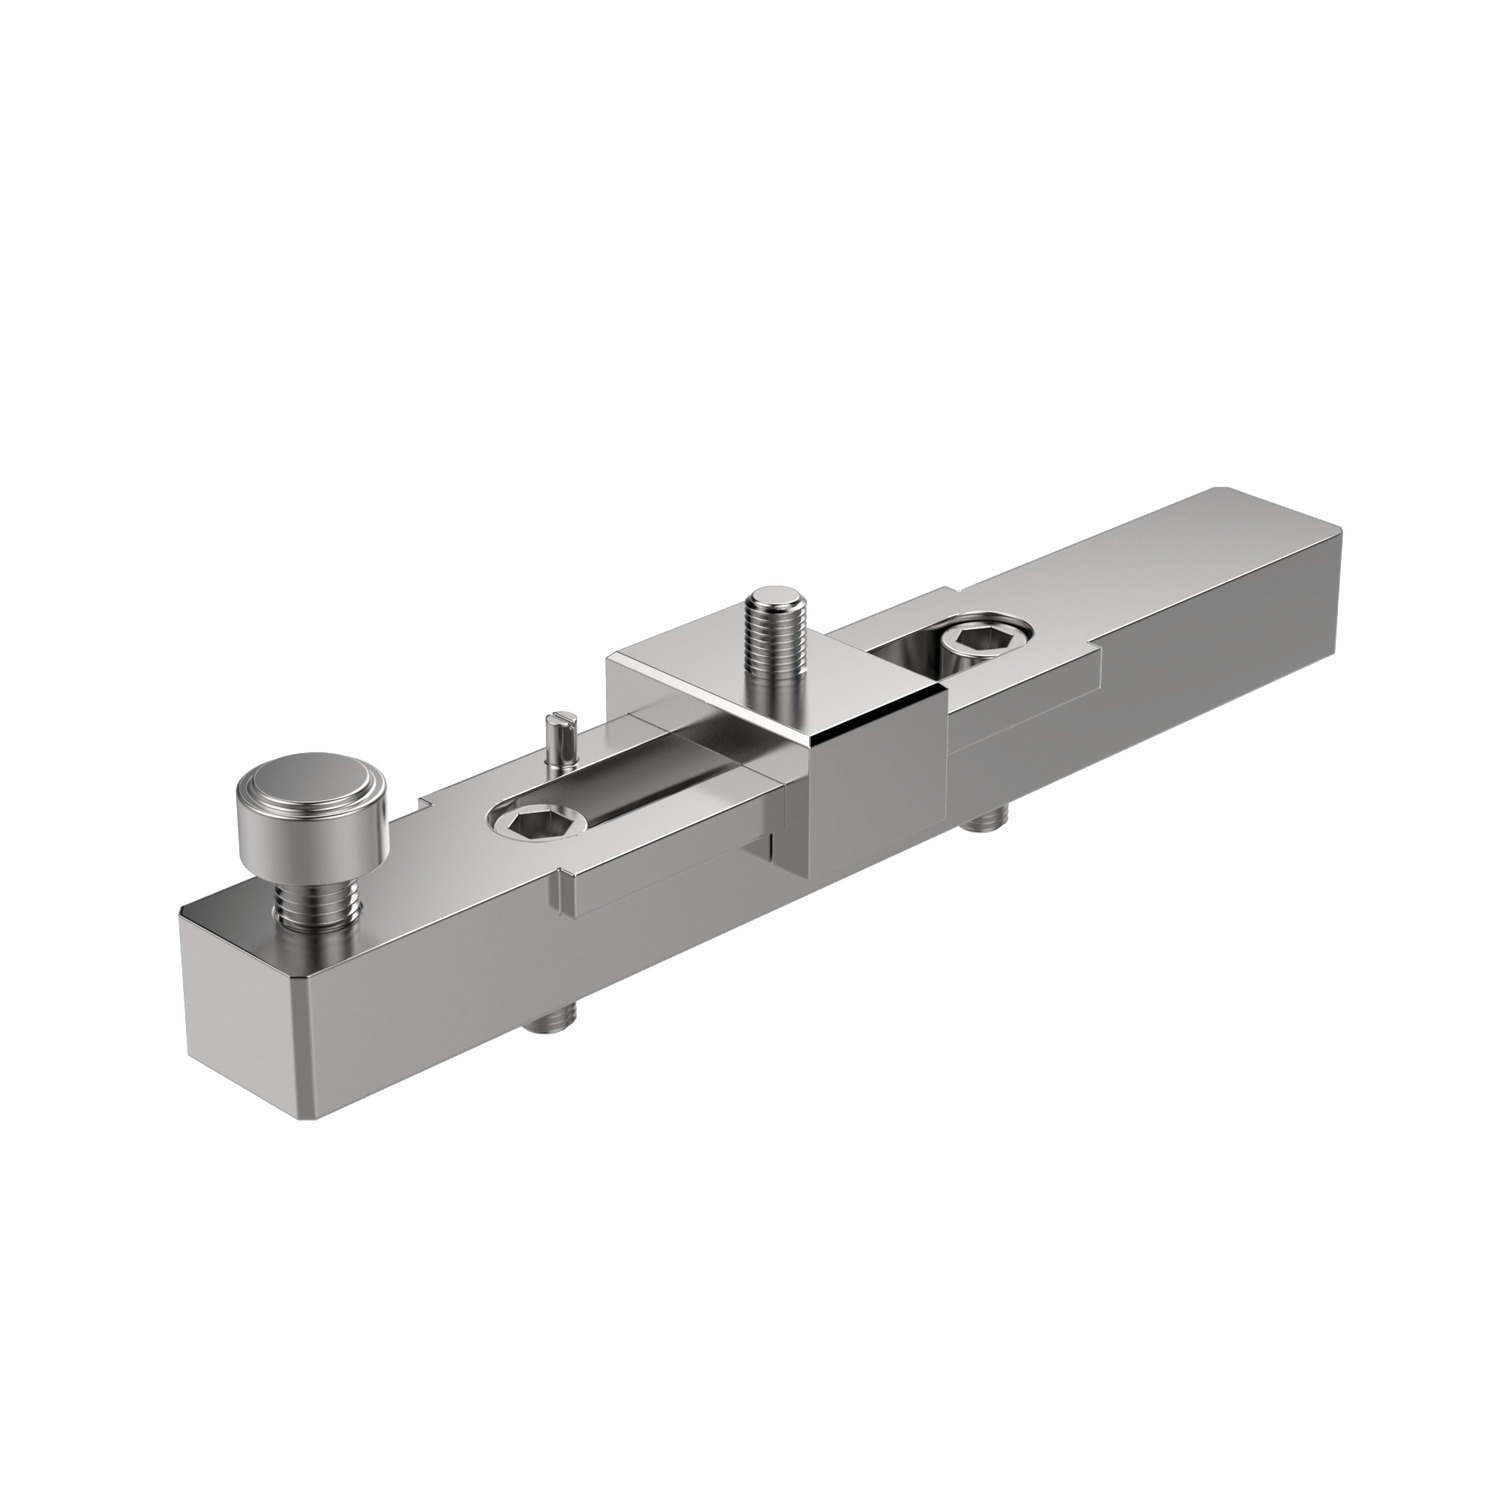 Product 10663, Mounting Bar - Sliding for big block clamps no. 10661 / 